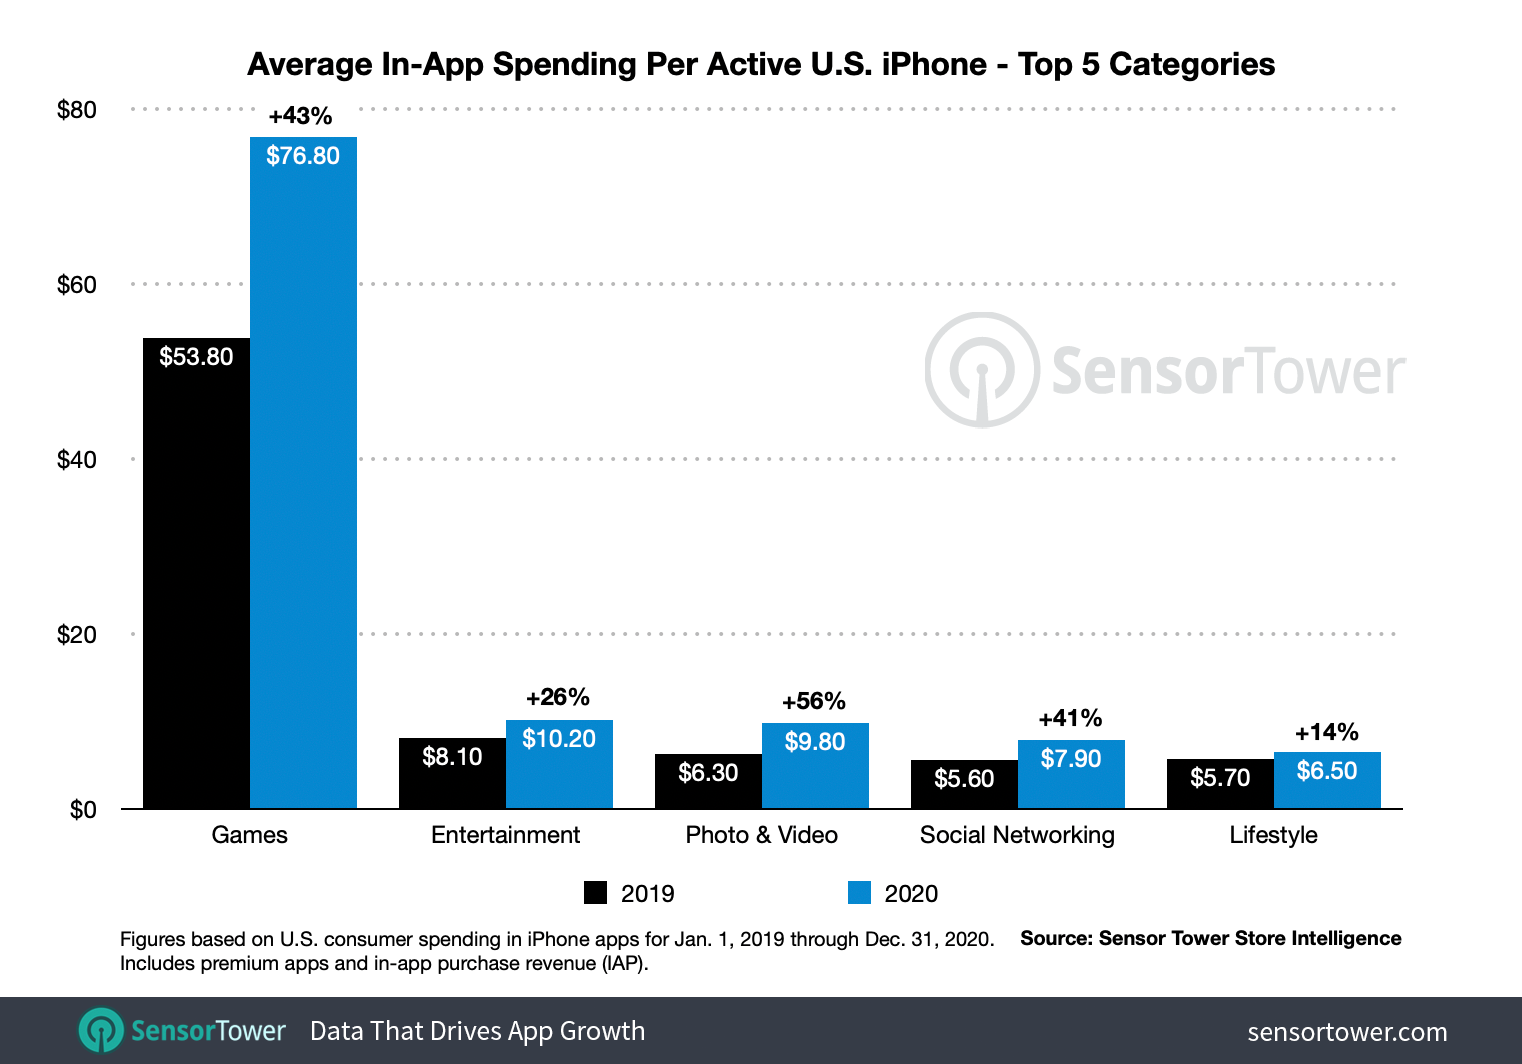 Games, Entertainment, Photo and Video, Social Networking, and Lifestyle were the top five categories where U.S. iPhone users spent the most on average.